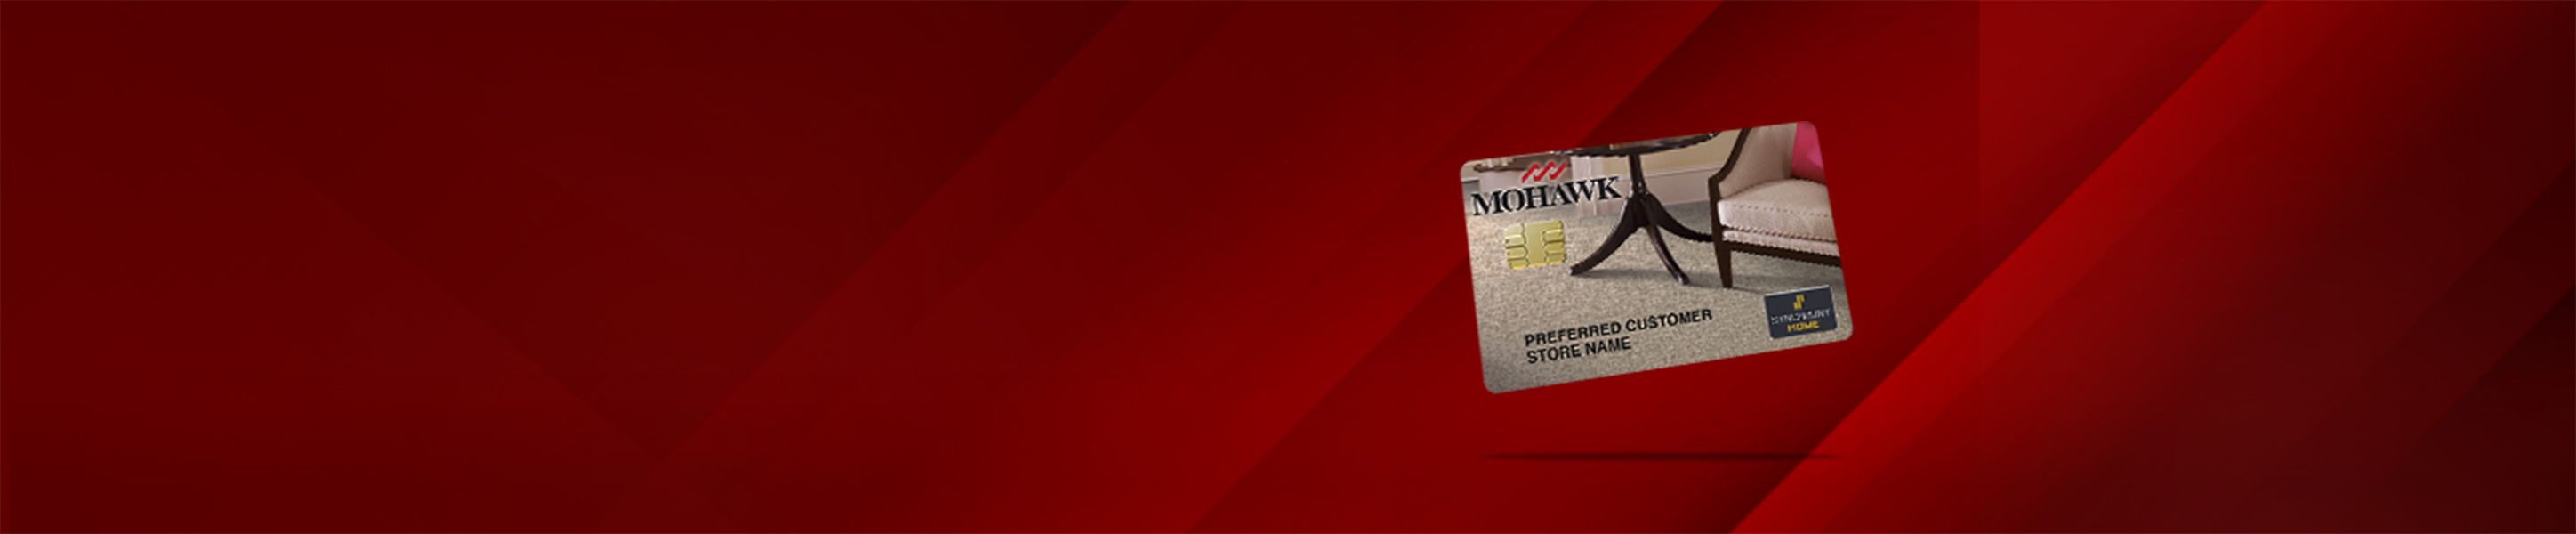 Mohawk Credit Card with a red banner background